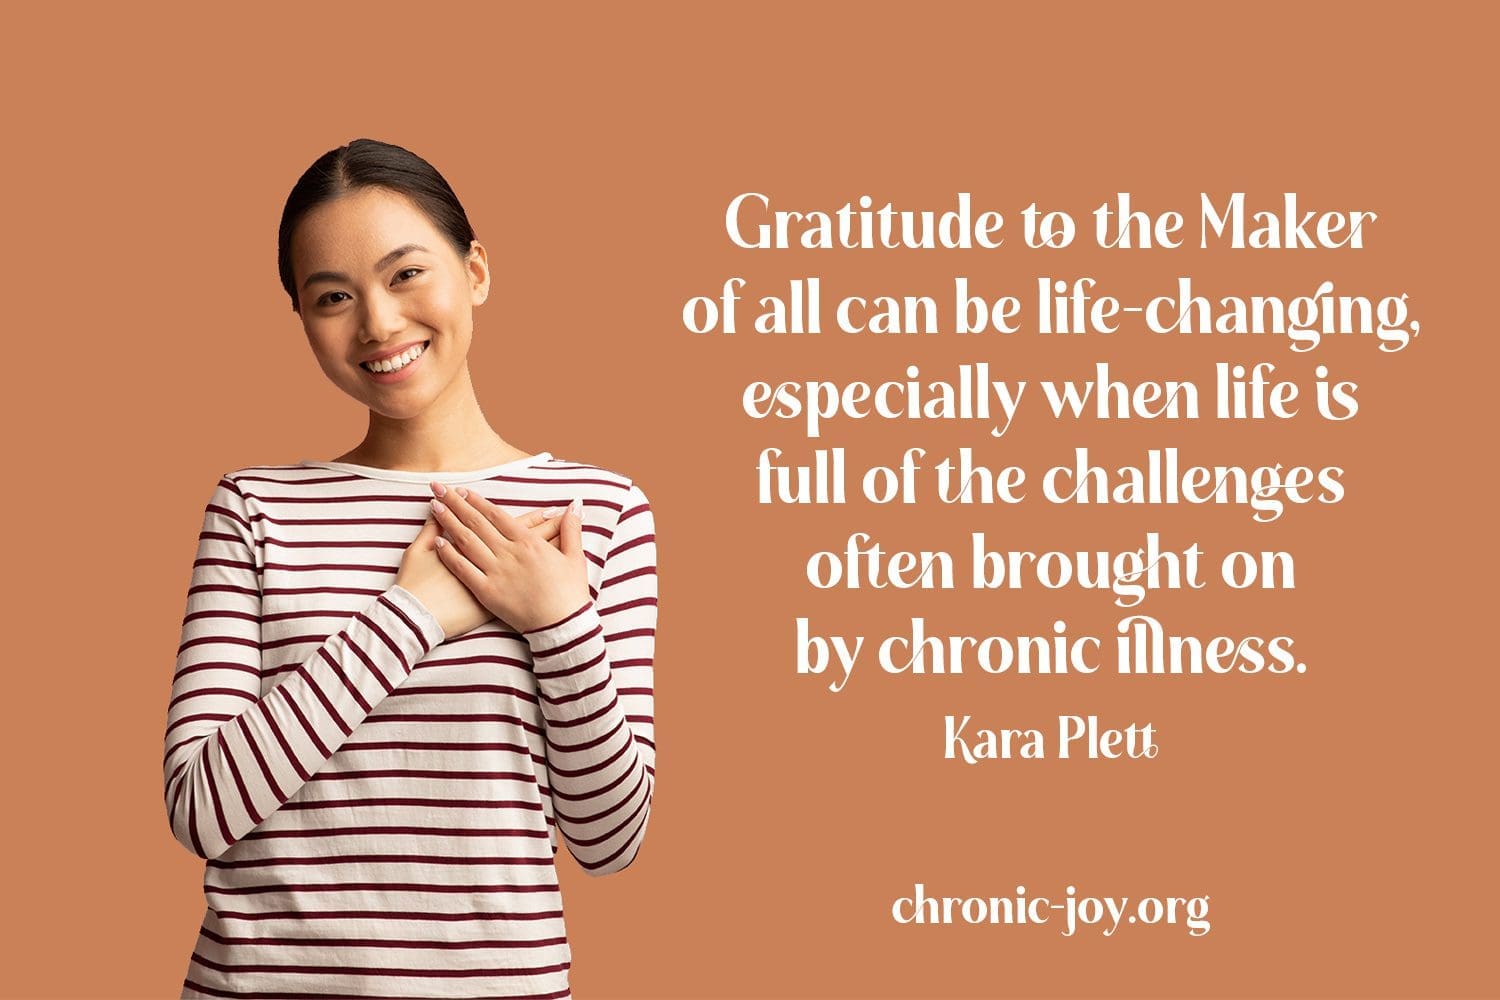 Gratitude can be life-changing in chronic